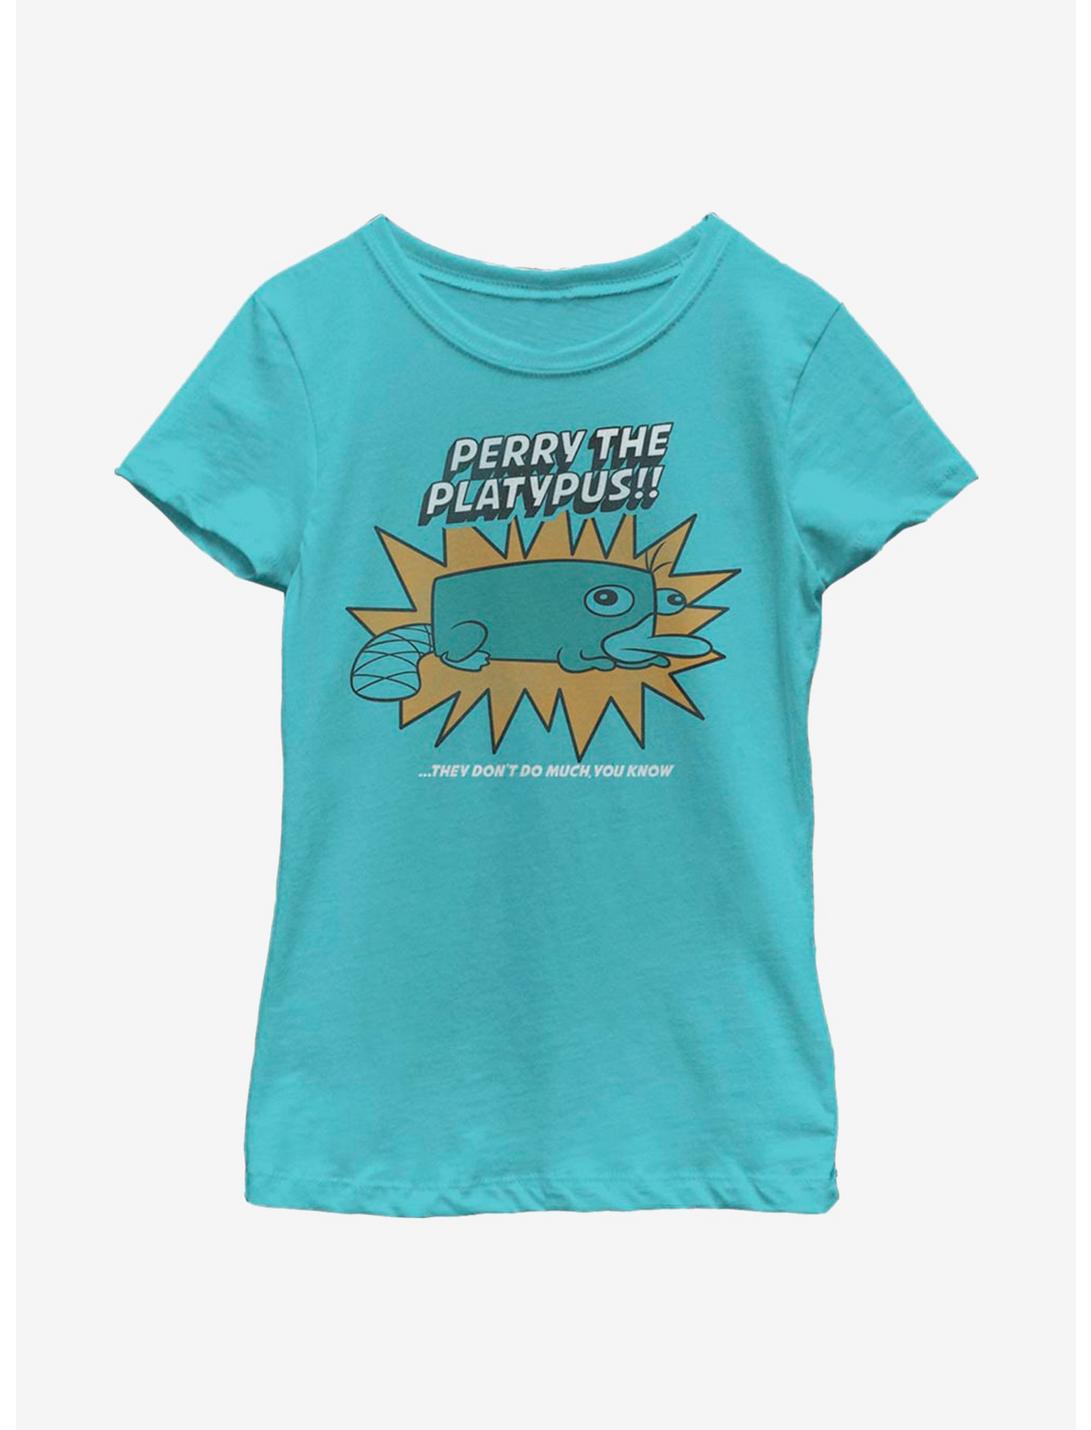 Disney Phineas And Ferb Perry The Platypus Youth Girls T-Shirt, TAHI BLUE, hi-res